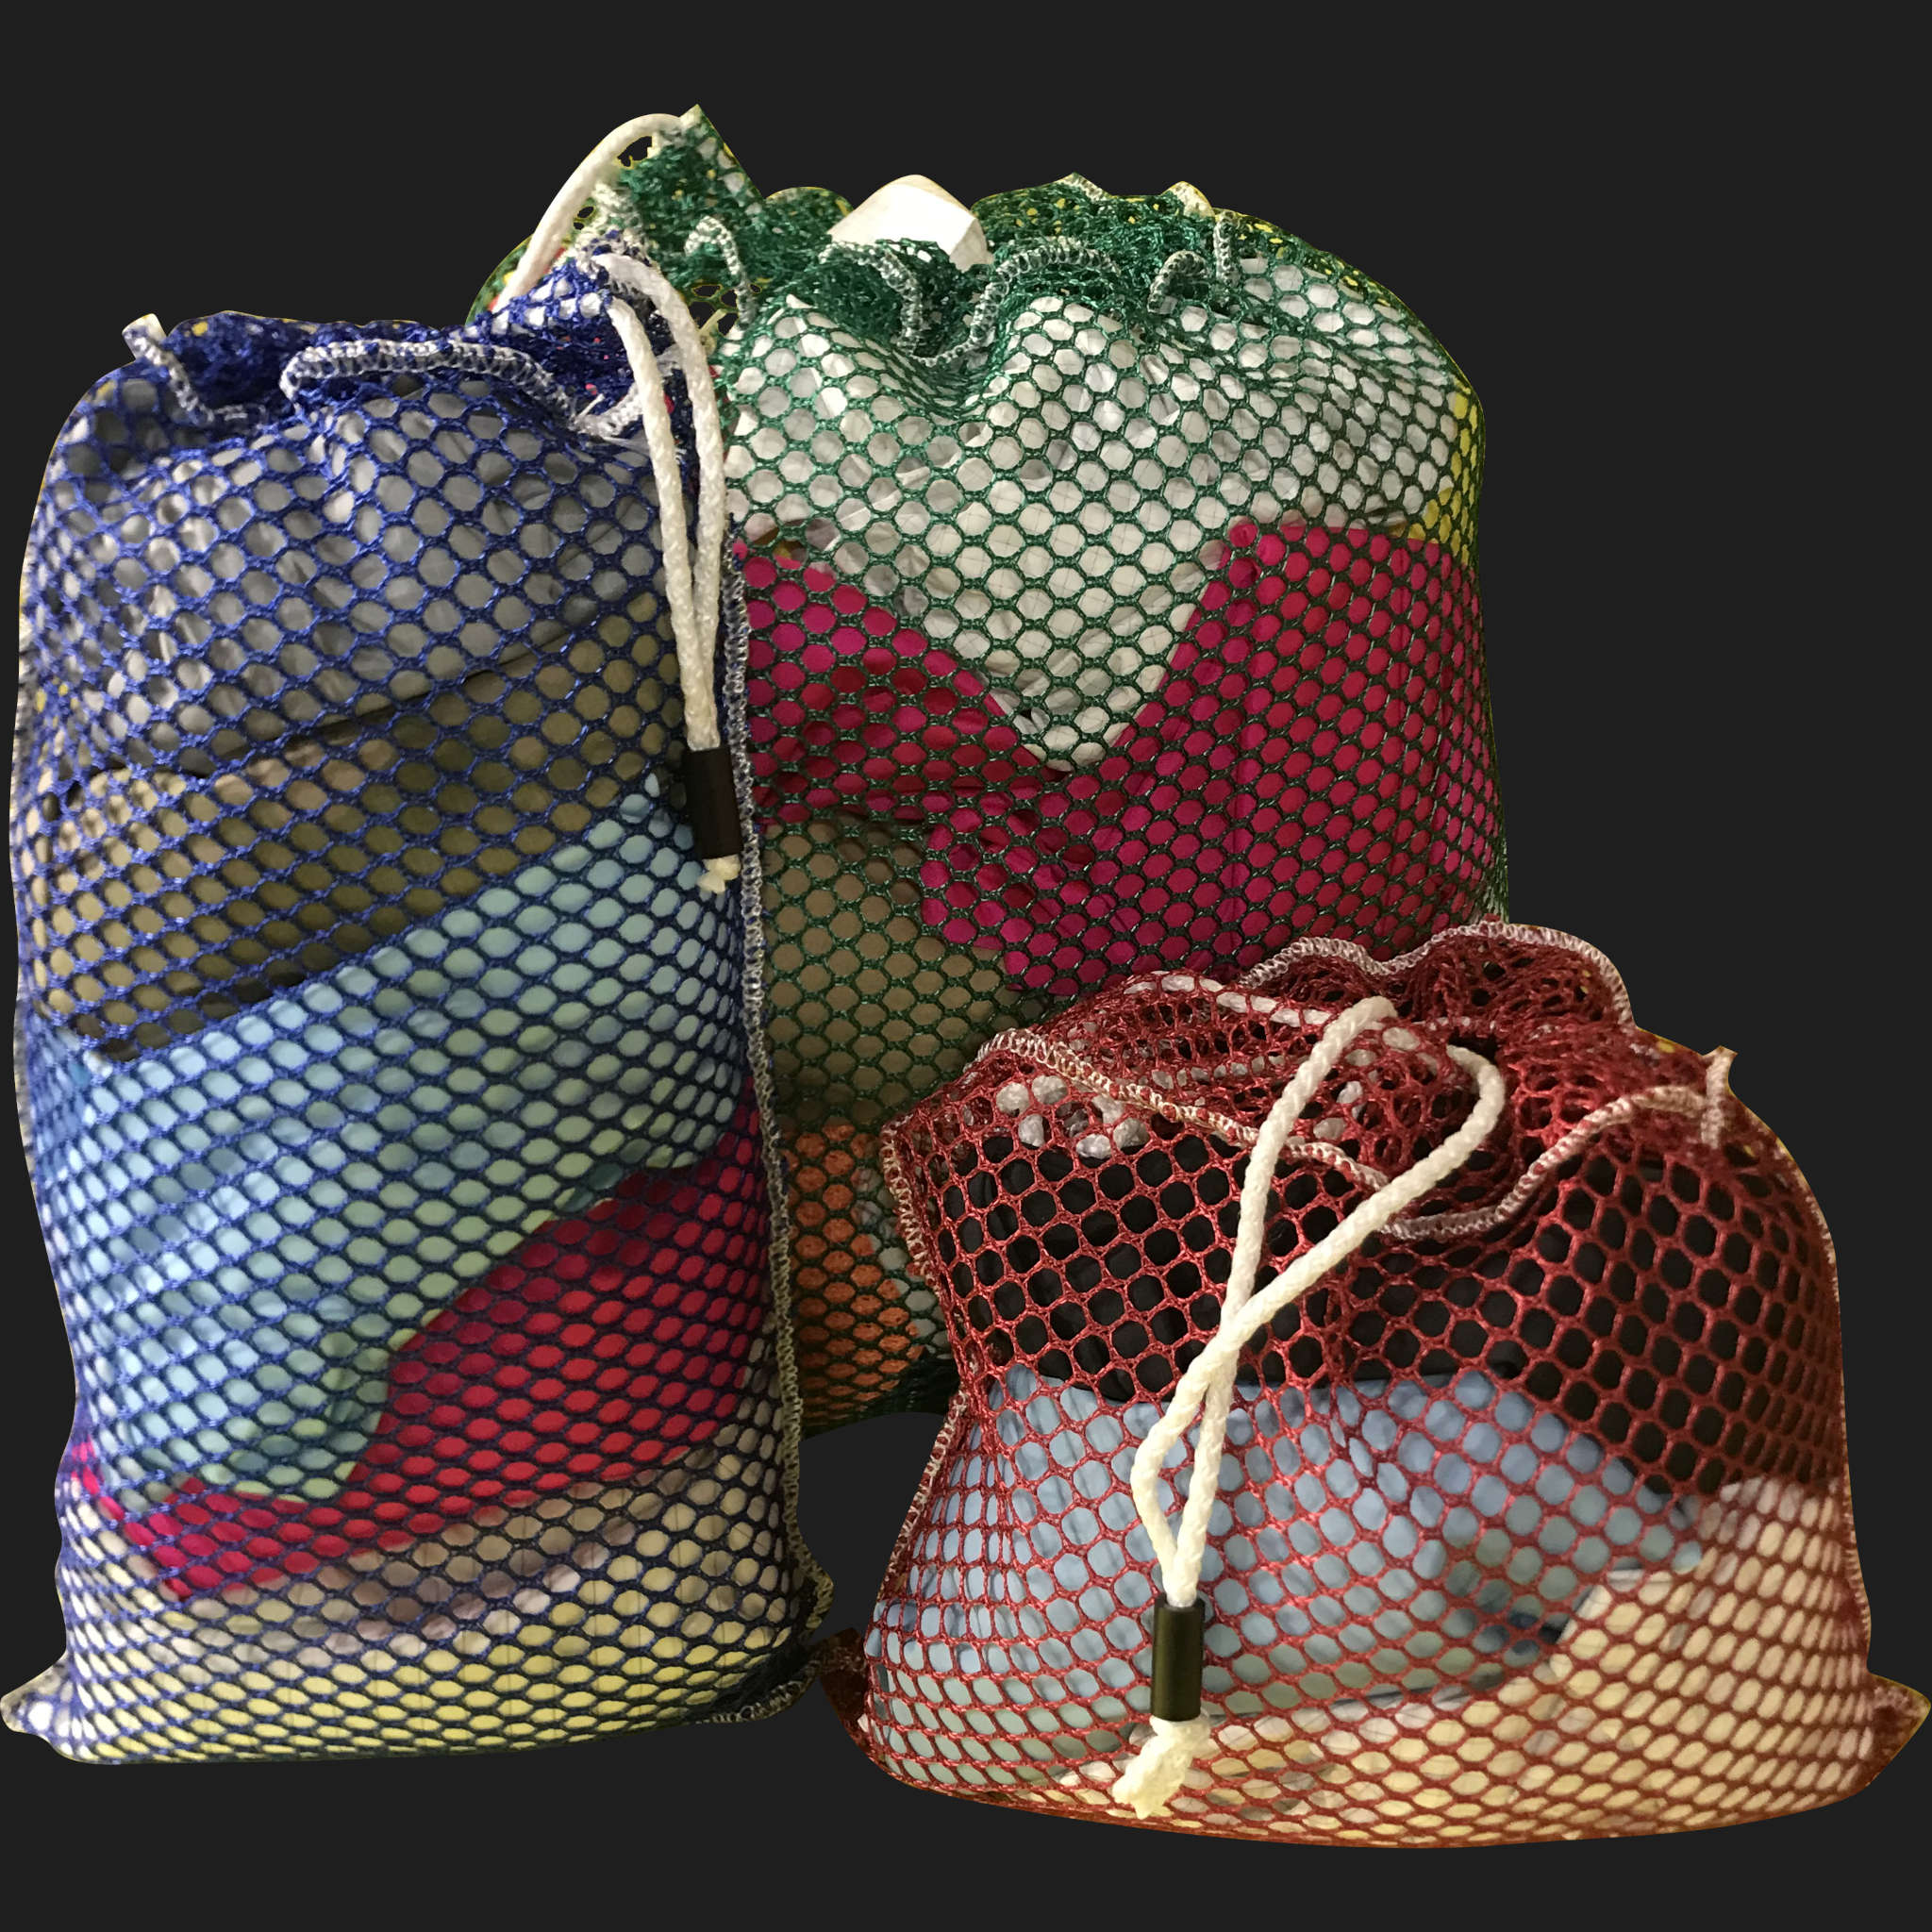 48" x 58" Customized Mesh-Net-Laundry Bags Heavy Duty with Cord and barrellock closure